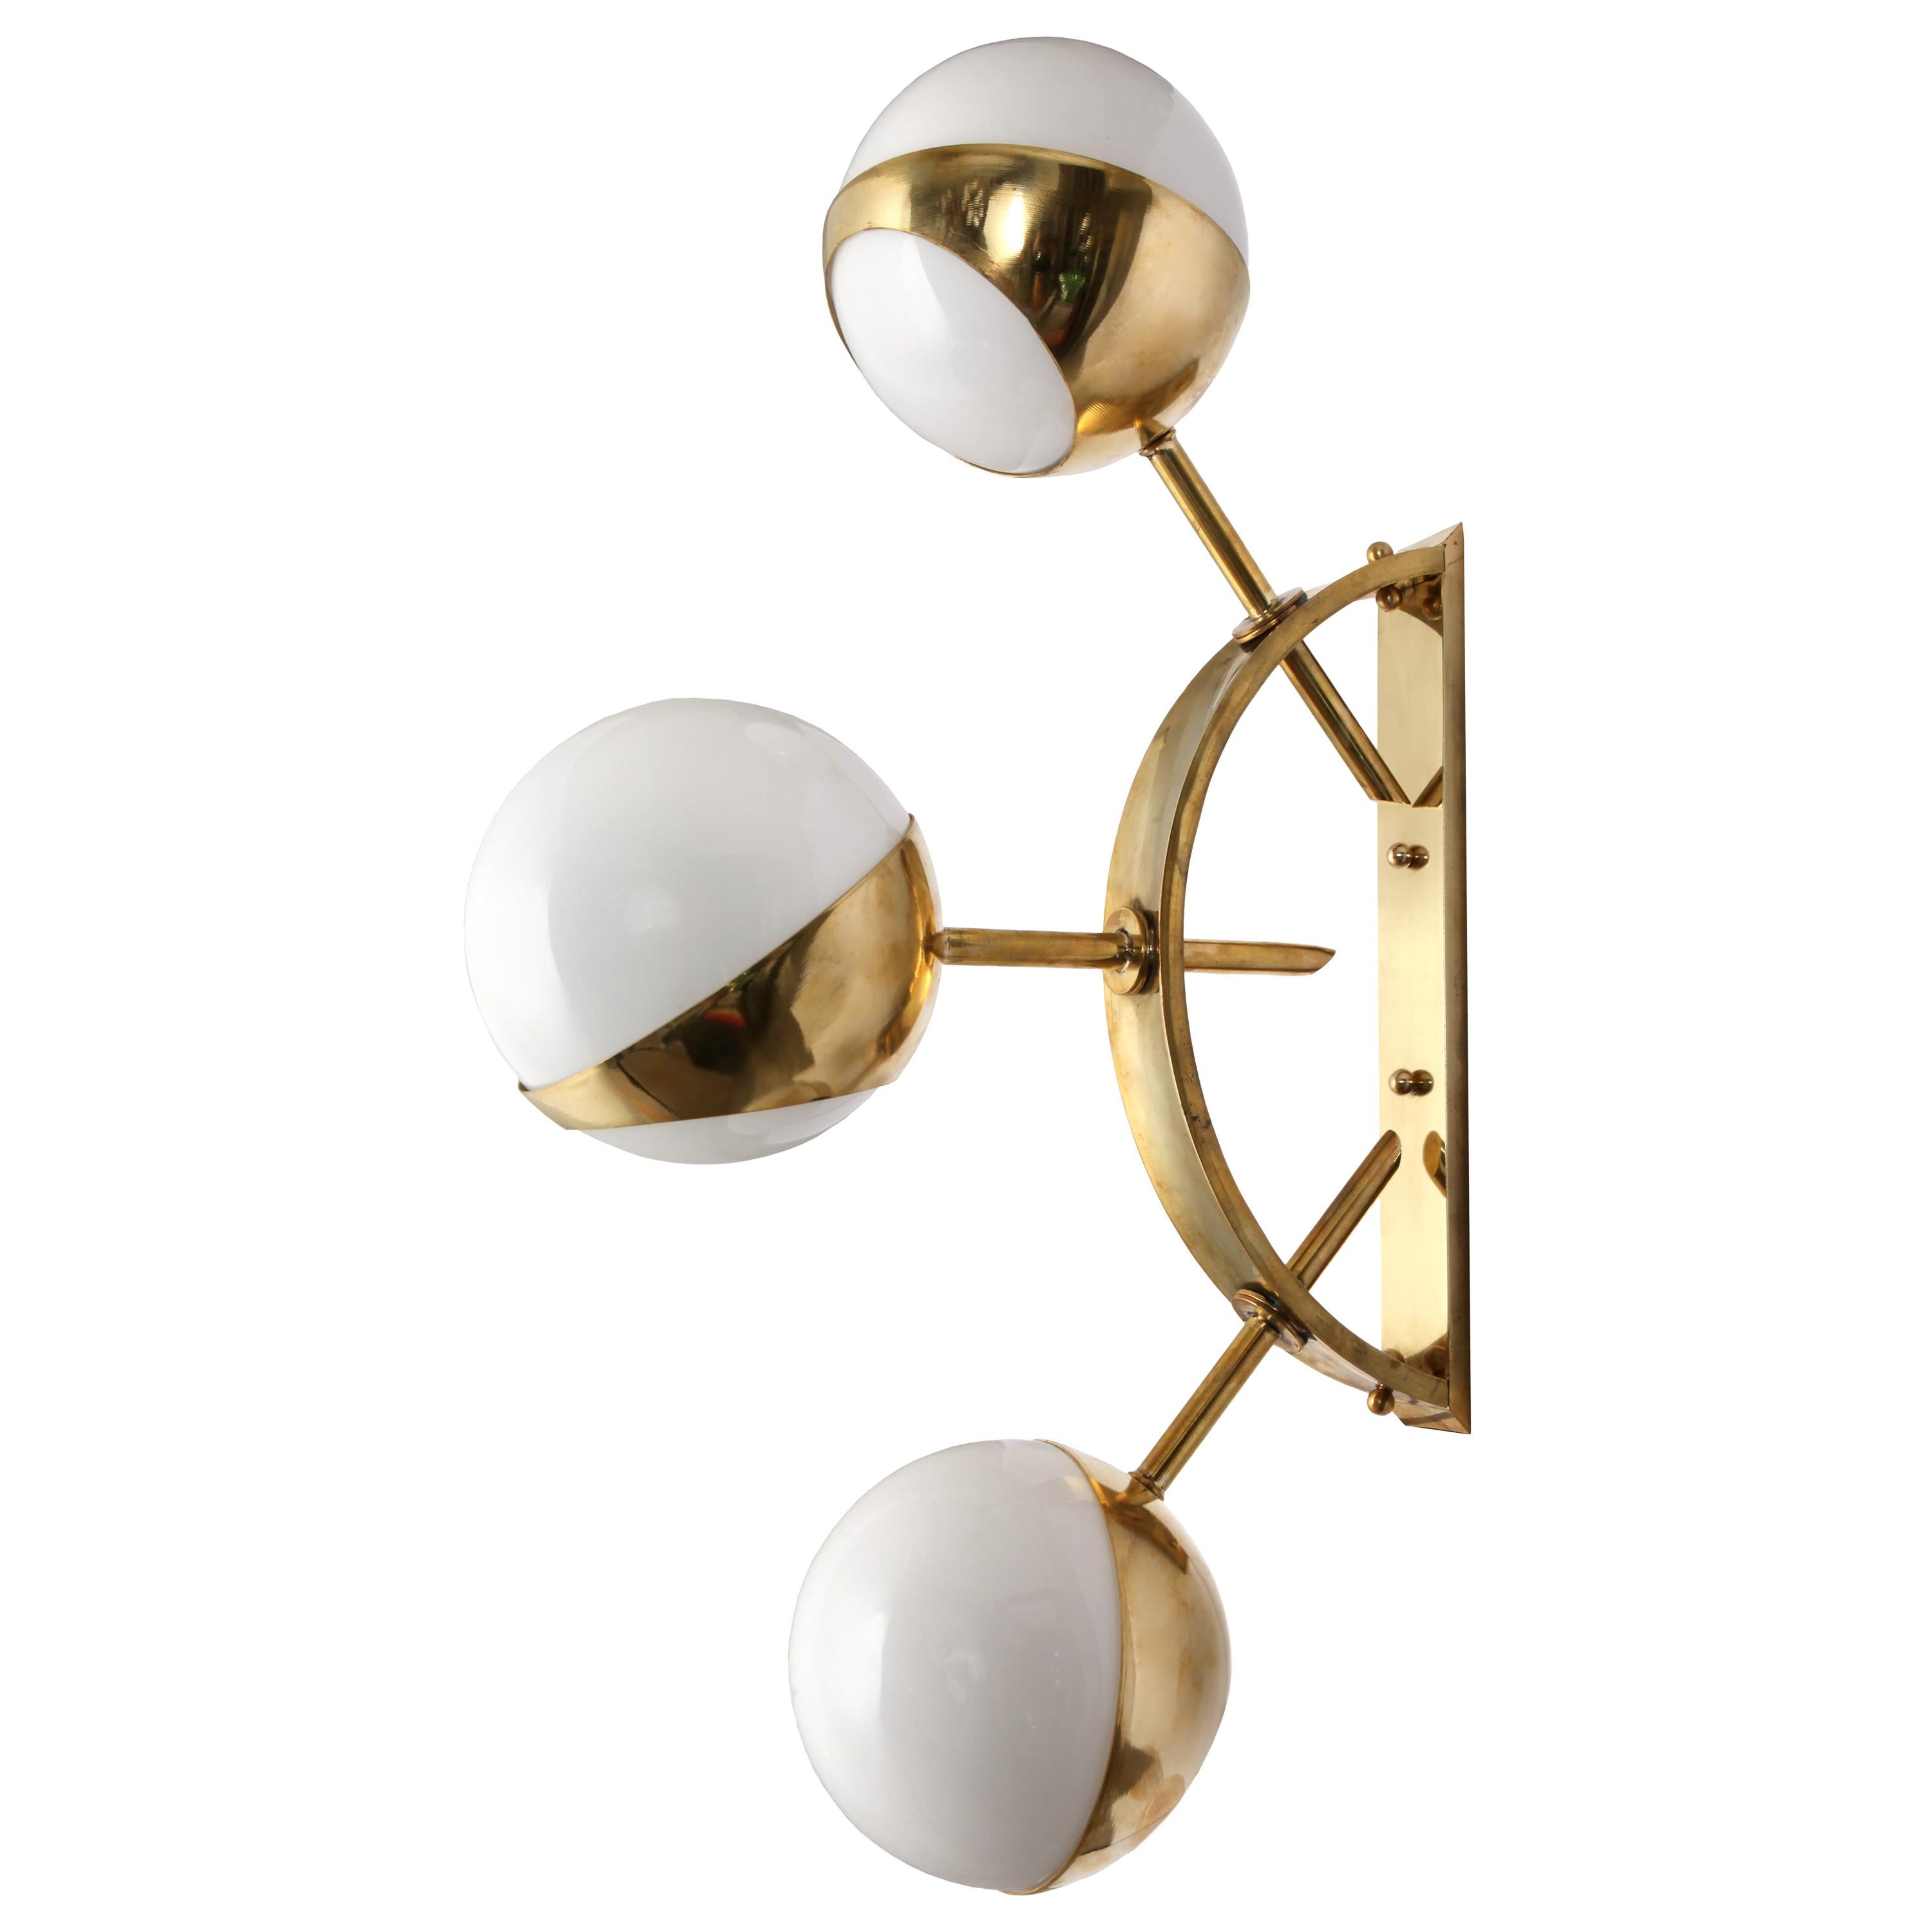 A semi-circular brass-mounted wall light with three opal shades in the style of Stilnovo. The brass is un-lacquered and left natural which means over time it will take on an aged patina, but can be polished to a shine. 

Wired for EU, each sconce